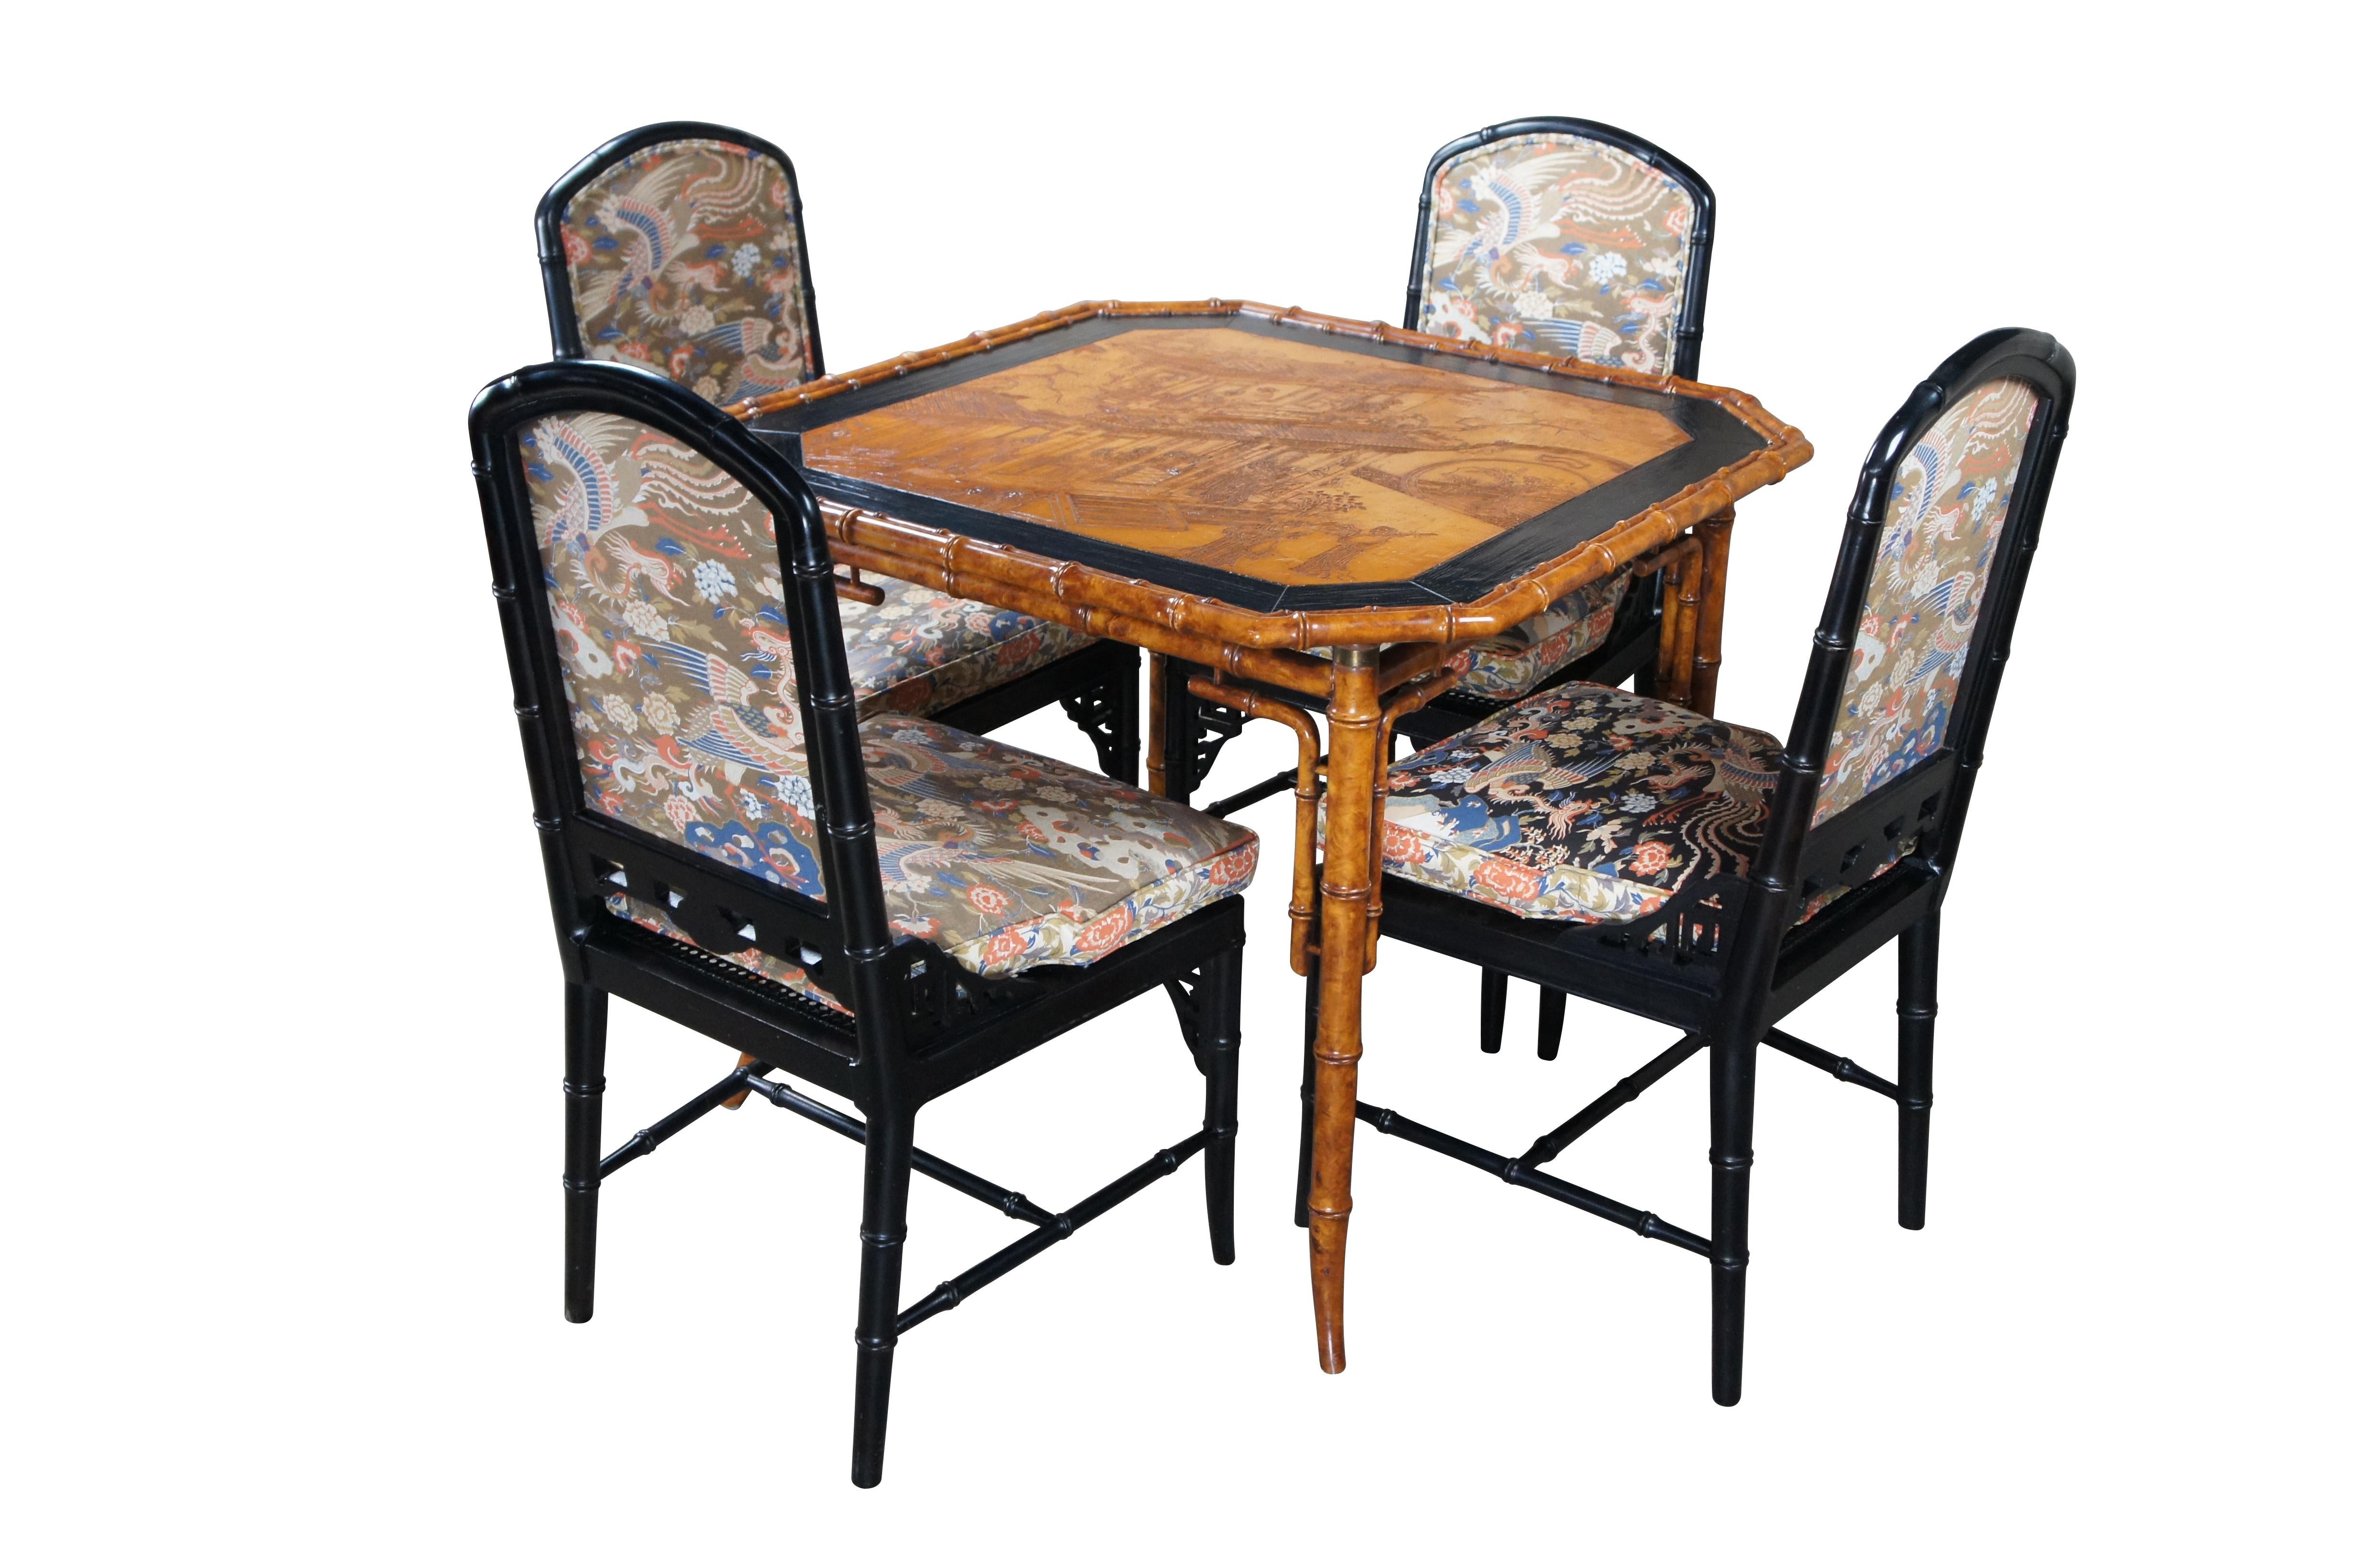 Chinoiserie Faux Bamboo Black Lacquer Crane Geisha Game Table & Chairs In Good Condition For Sale In Dayton, OH